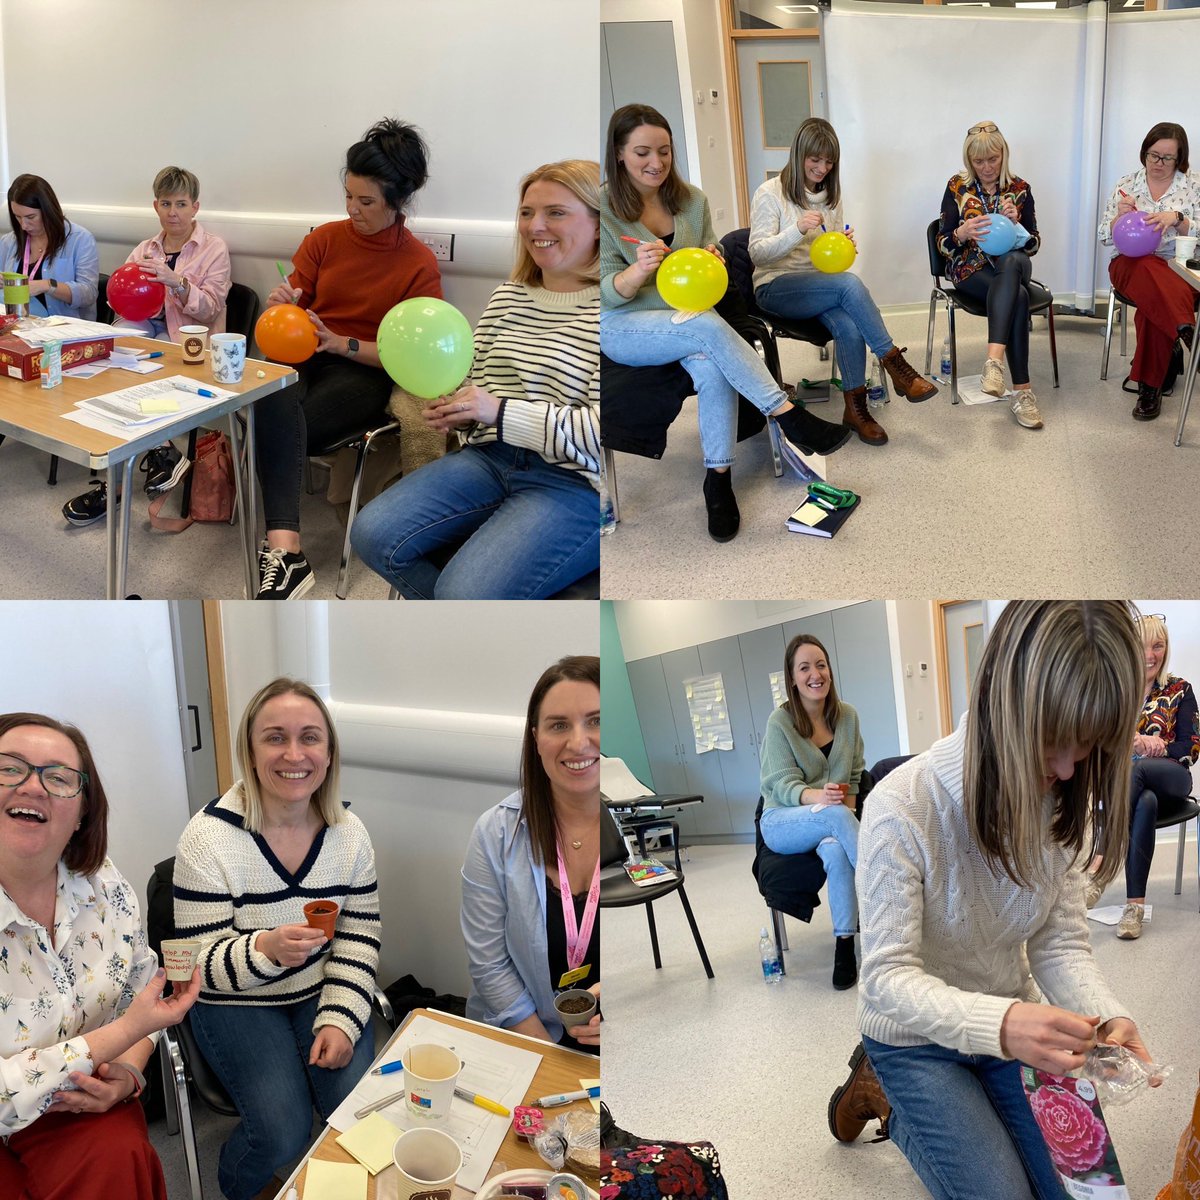 What a privilege to spend 2 days with the Emerald Team- team building & so much laughter culminating in the development of their team vision. Such passion in the room for midwifery & women #CoMCTeamEmerald #TeamSHSCT @Jen_McKenna_ @GailDoak @midwifewendy @ck565 @MariaGarvey16